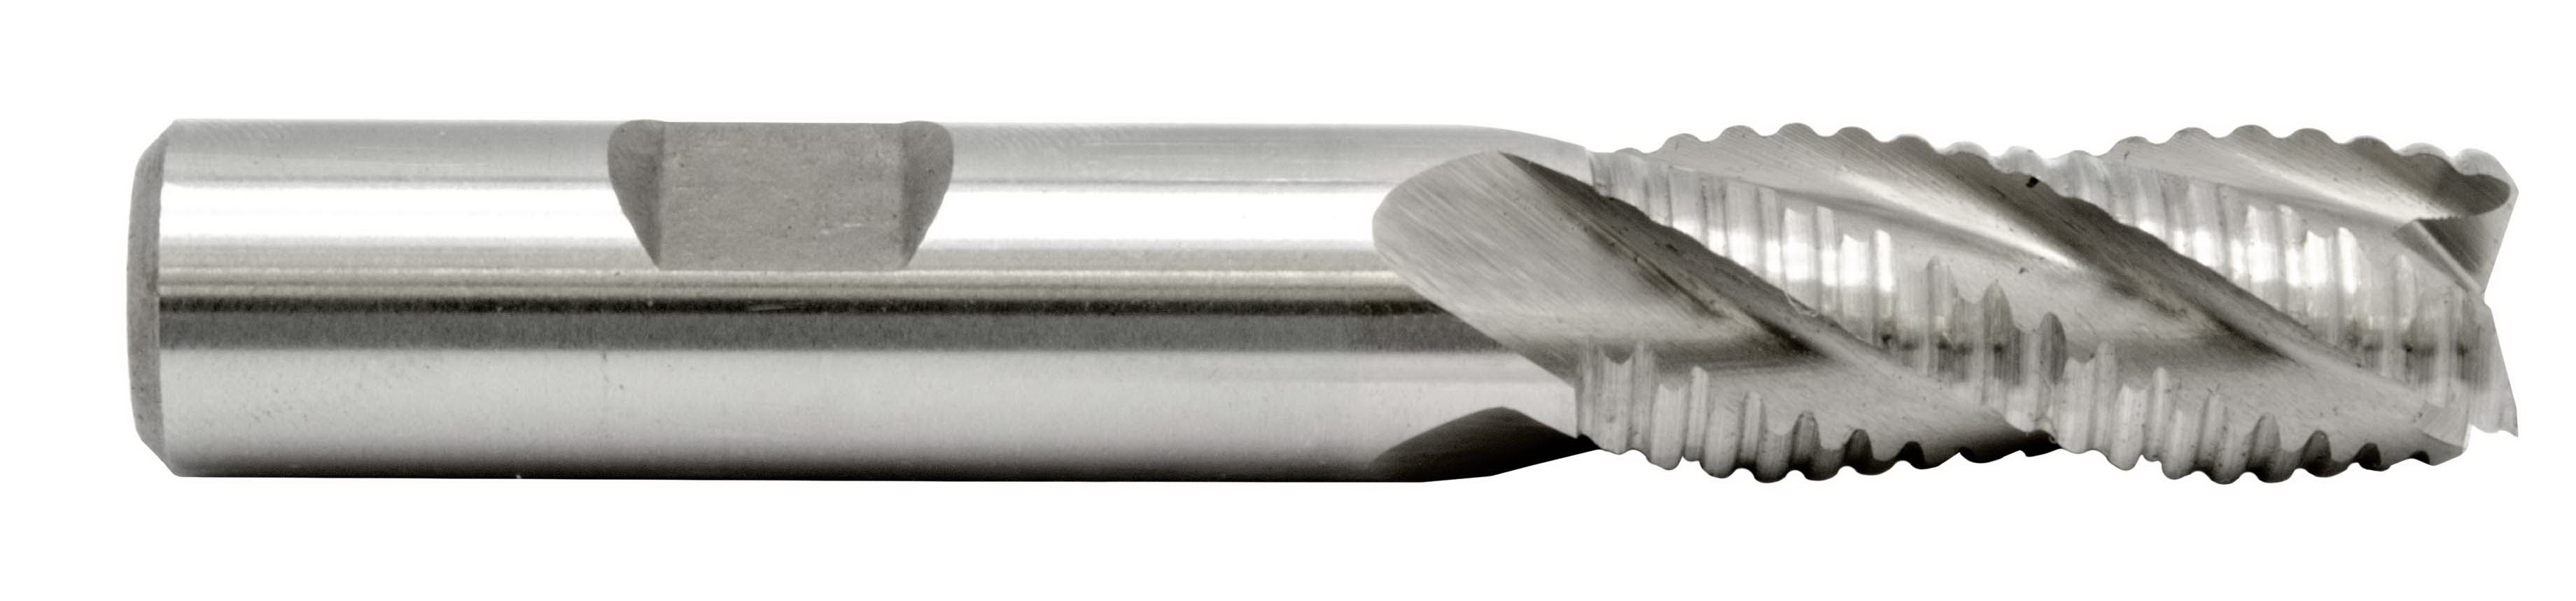 Michigan Drill Series 246S 1/8 Miniature Double End End Mill 4 Flute HSS